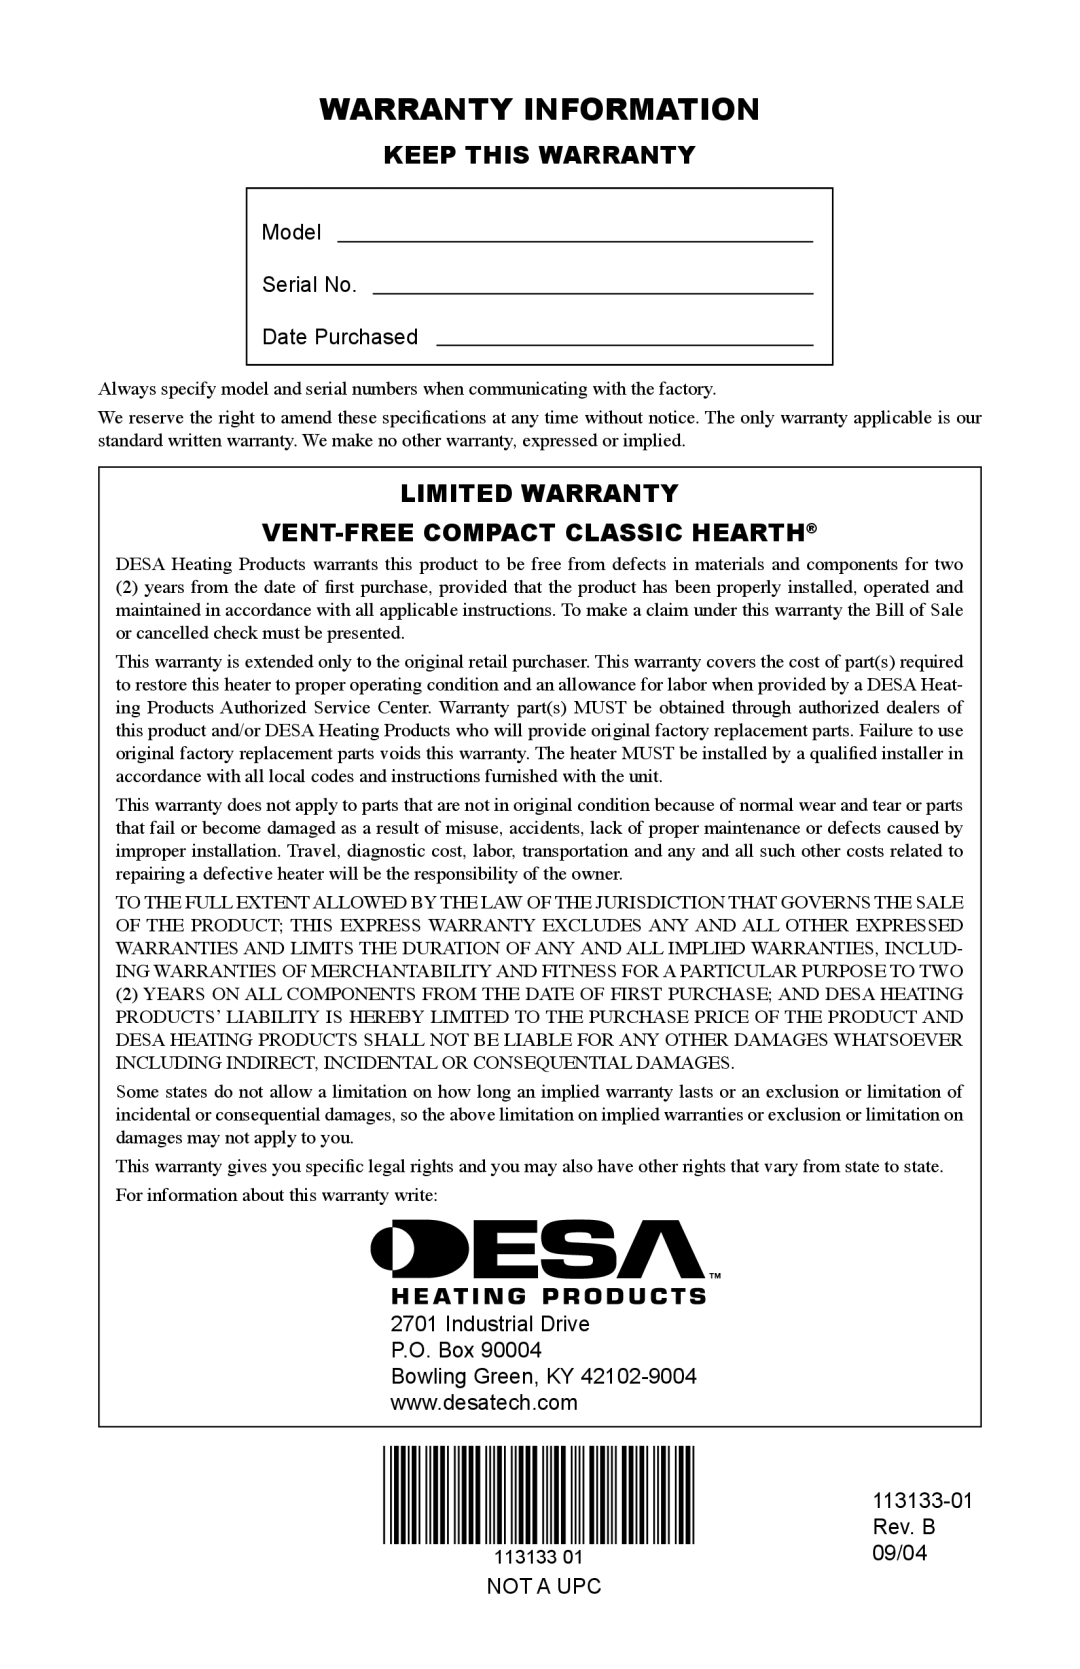 Desa VDCFRNA Warranty Information, Keep This Warranty, Limited Warranty Vent-Free Compact Classic Hearth, 113133-01 